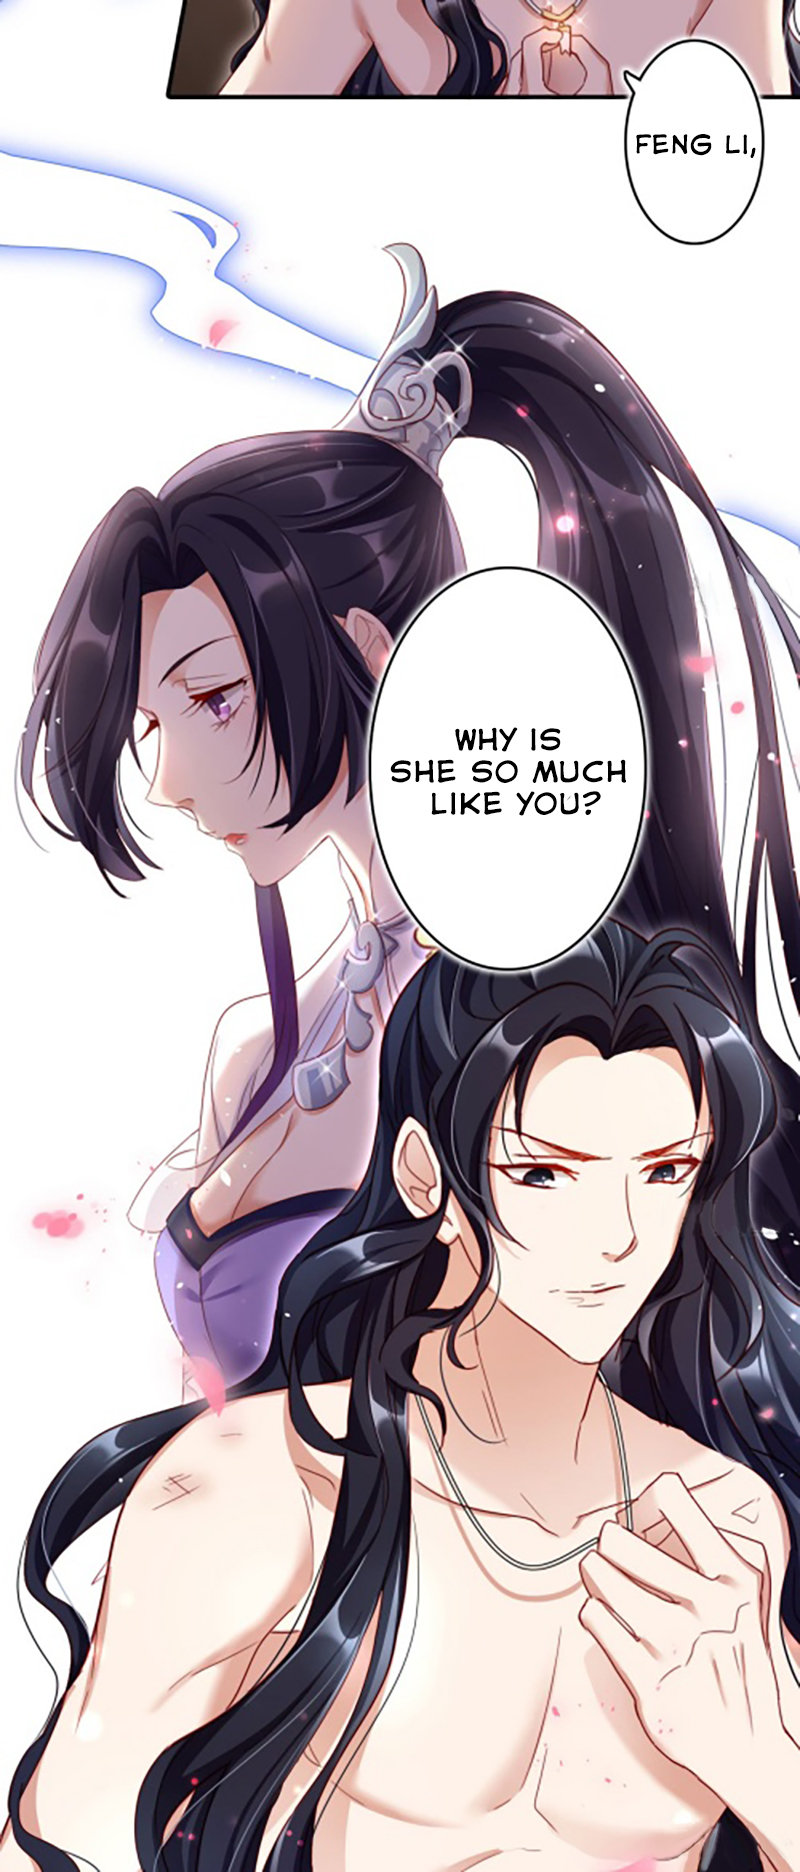 The Evil Girl is The Emperor Ch. 16 You are Irreplaceable